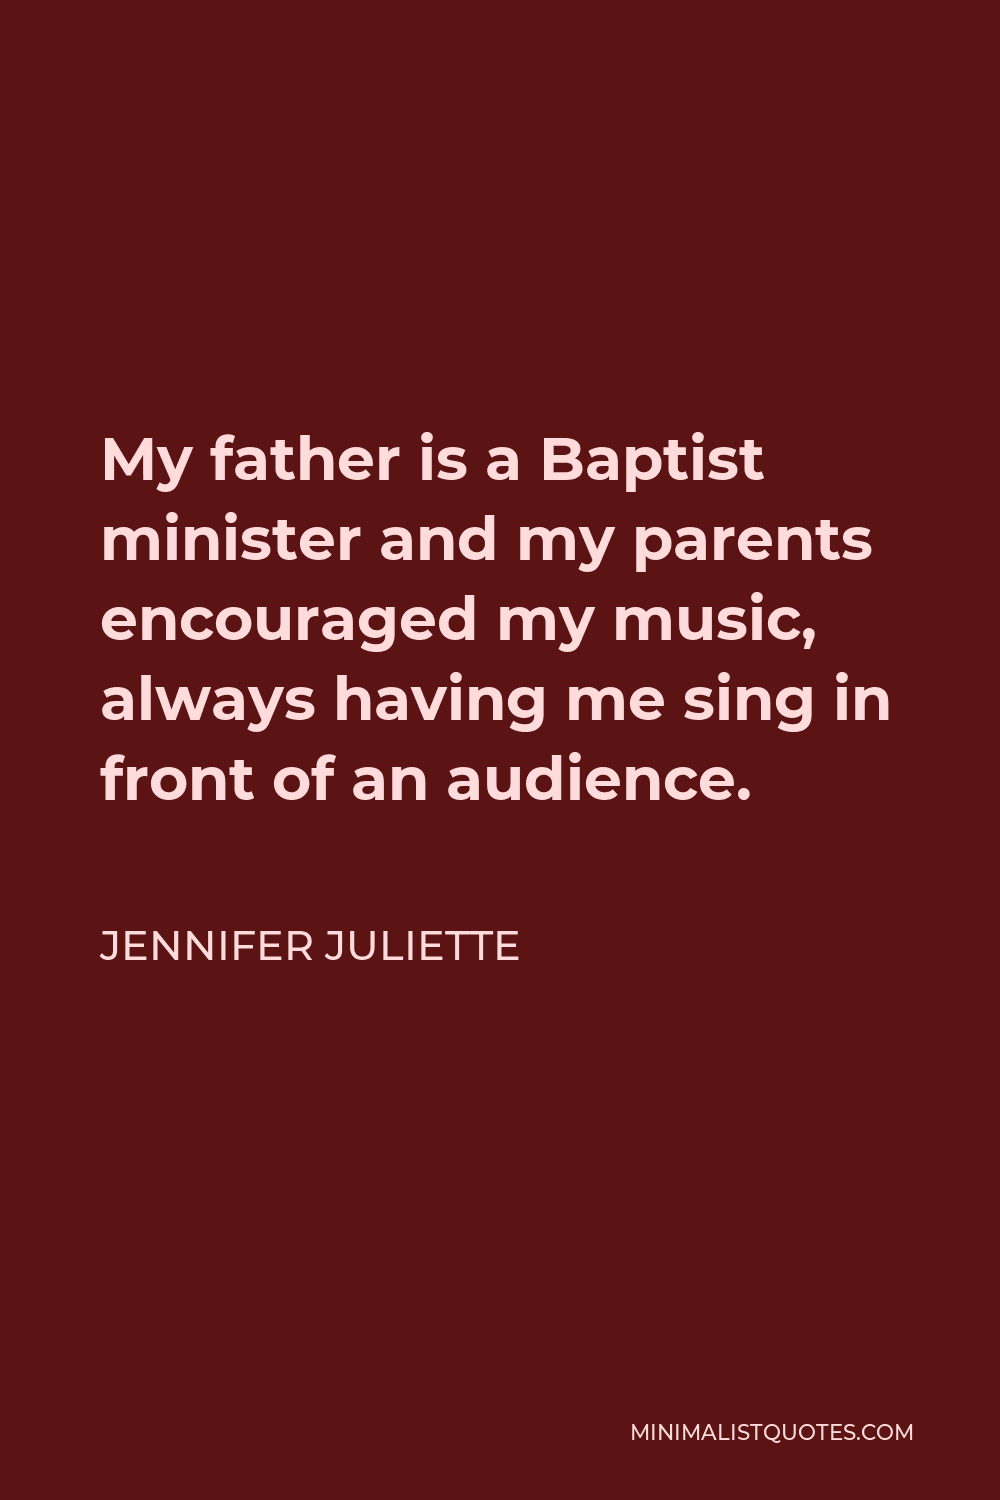 Jennifer Juliette Quote - My father is a Baptist minister and my parents encouraged my music, always having me sing in front of an audience.